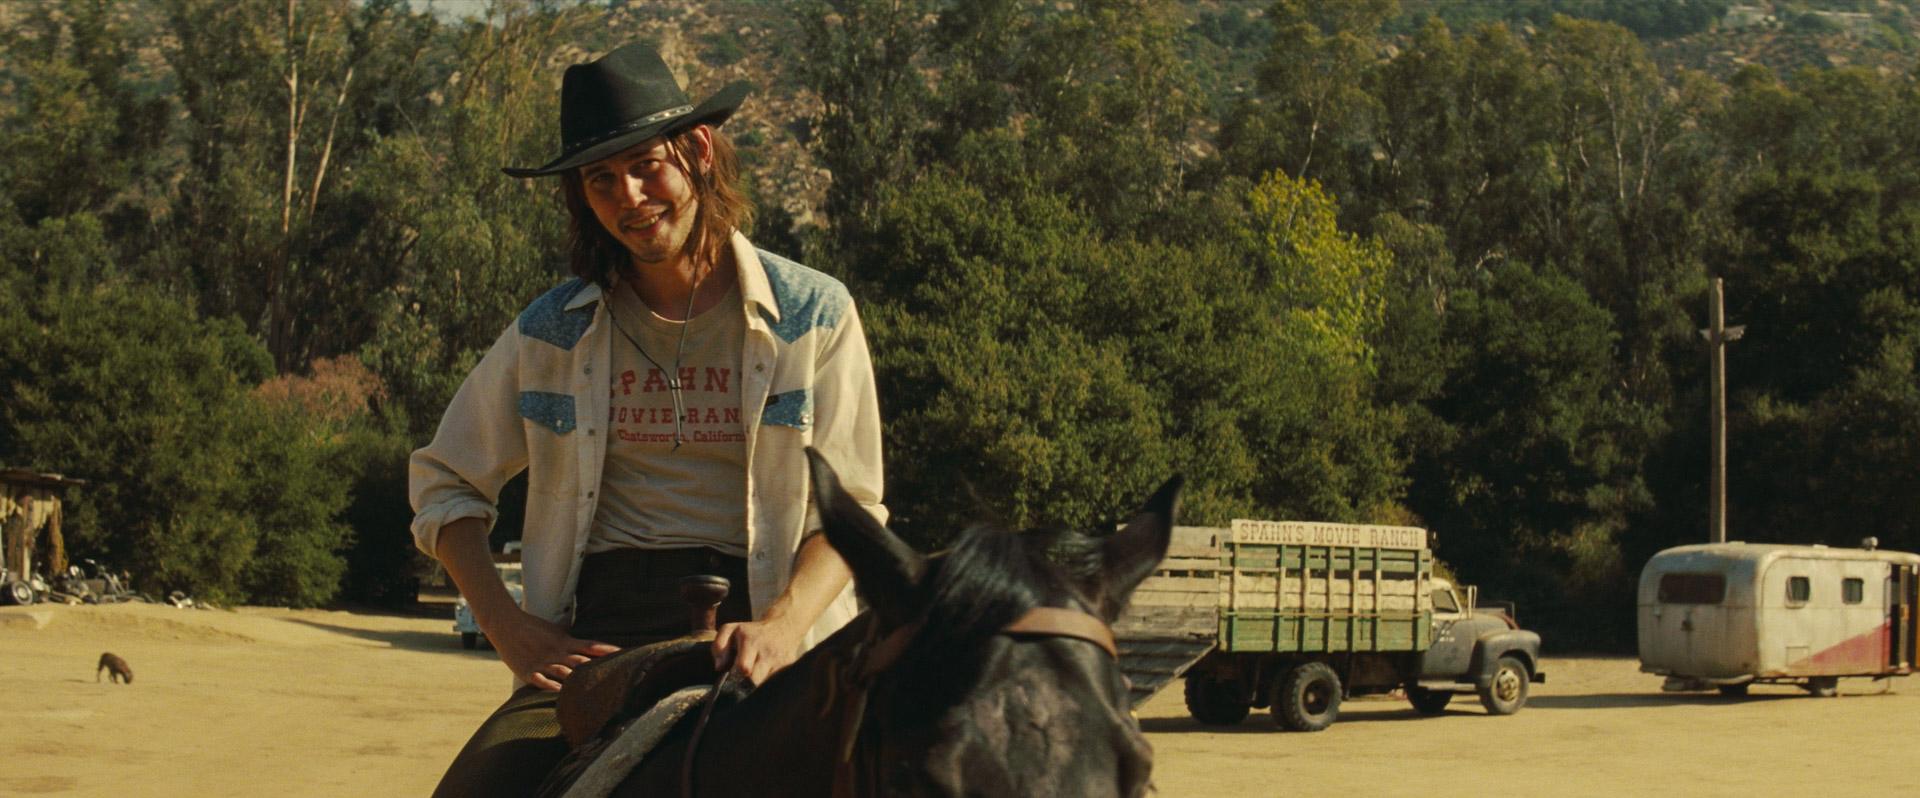 Austin Butler in once "Upon a Time In Hollywood"